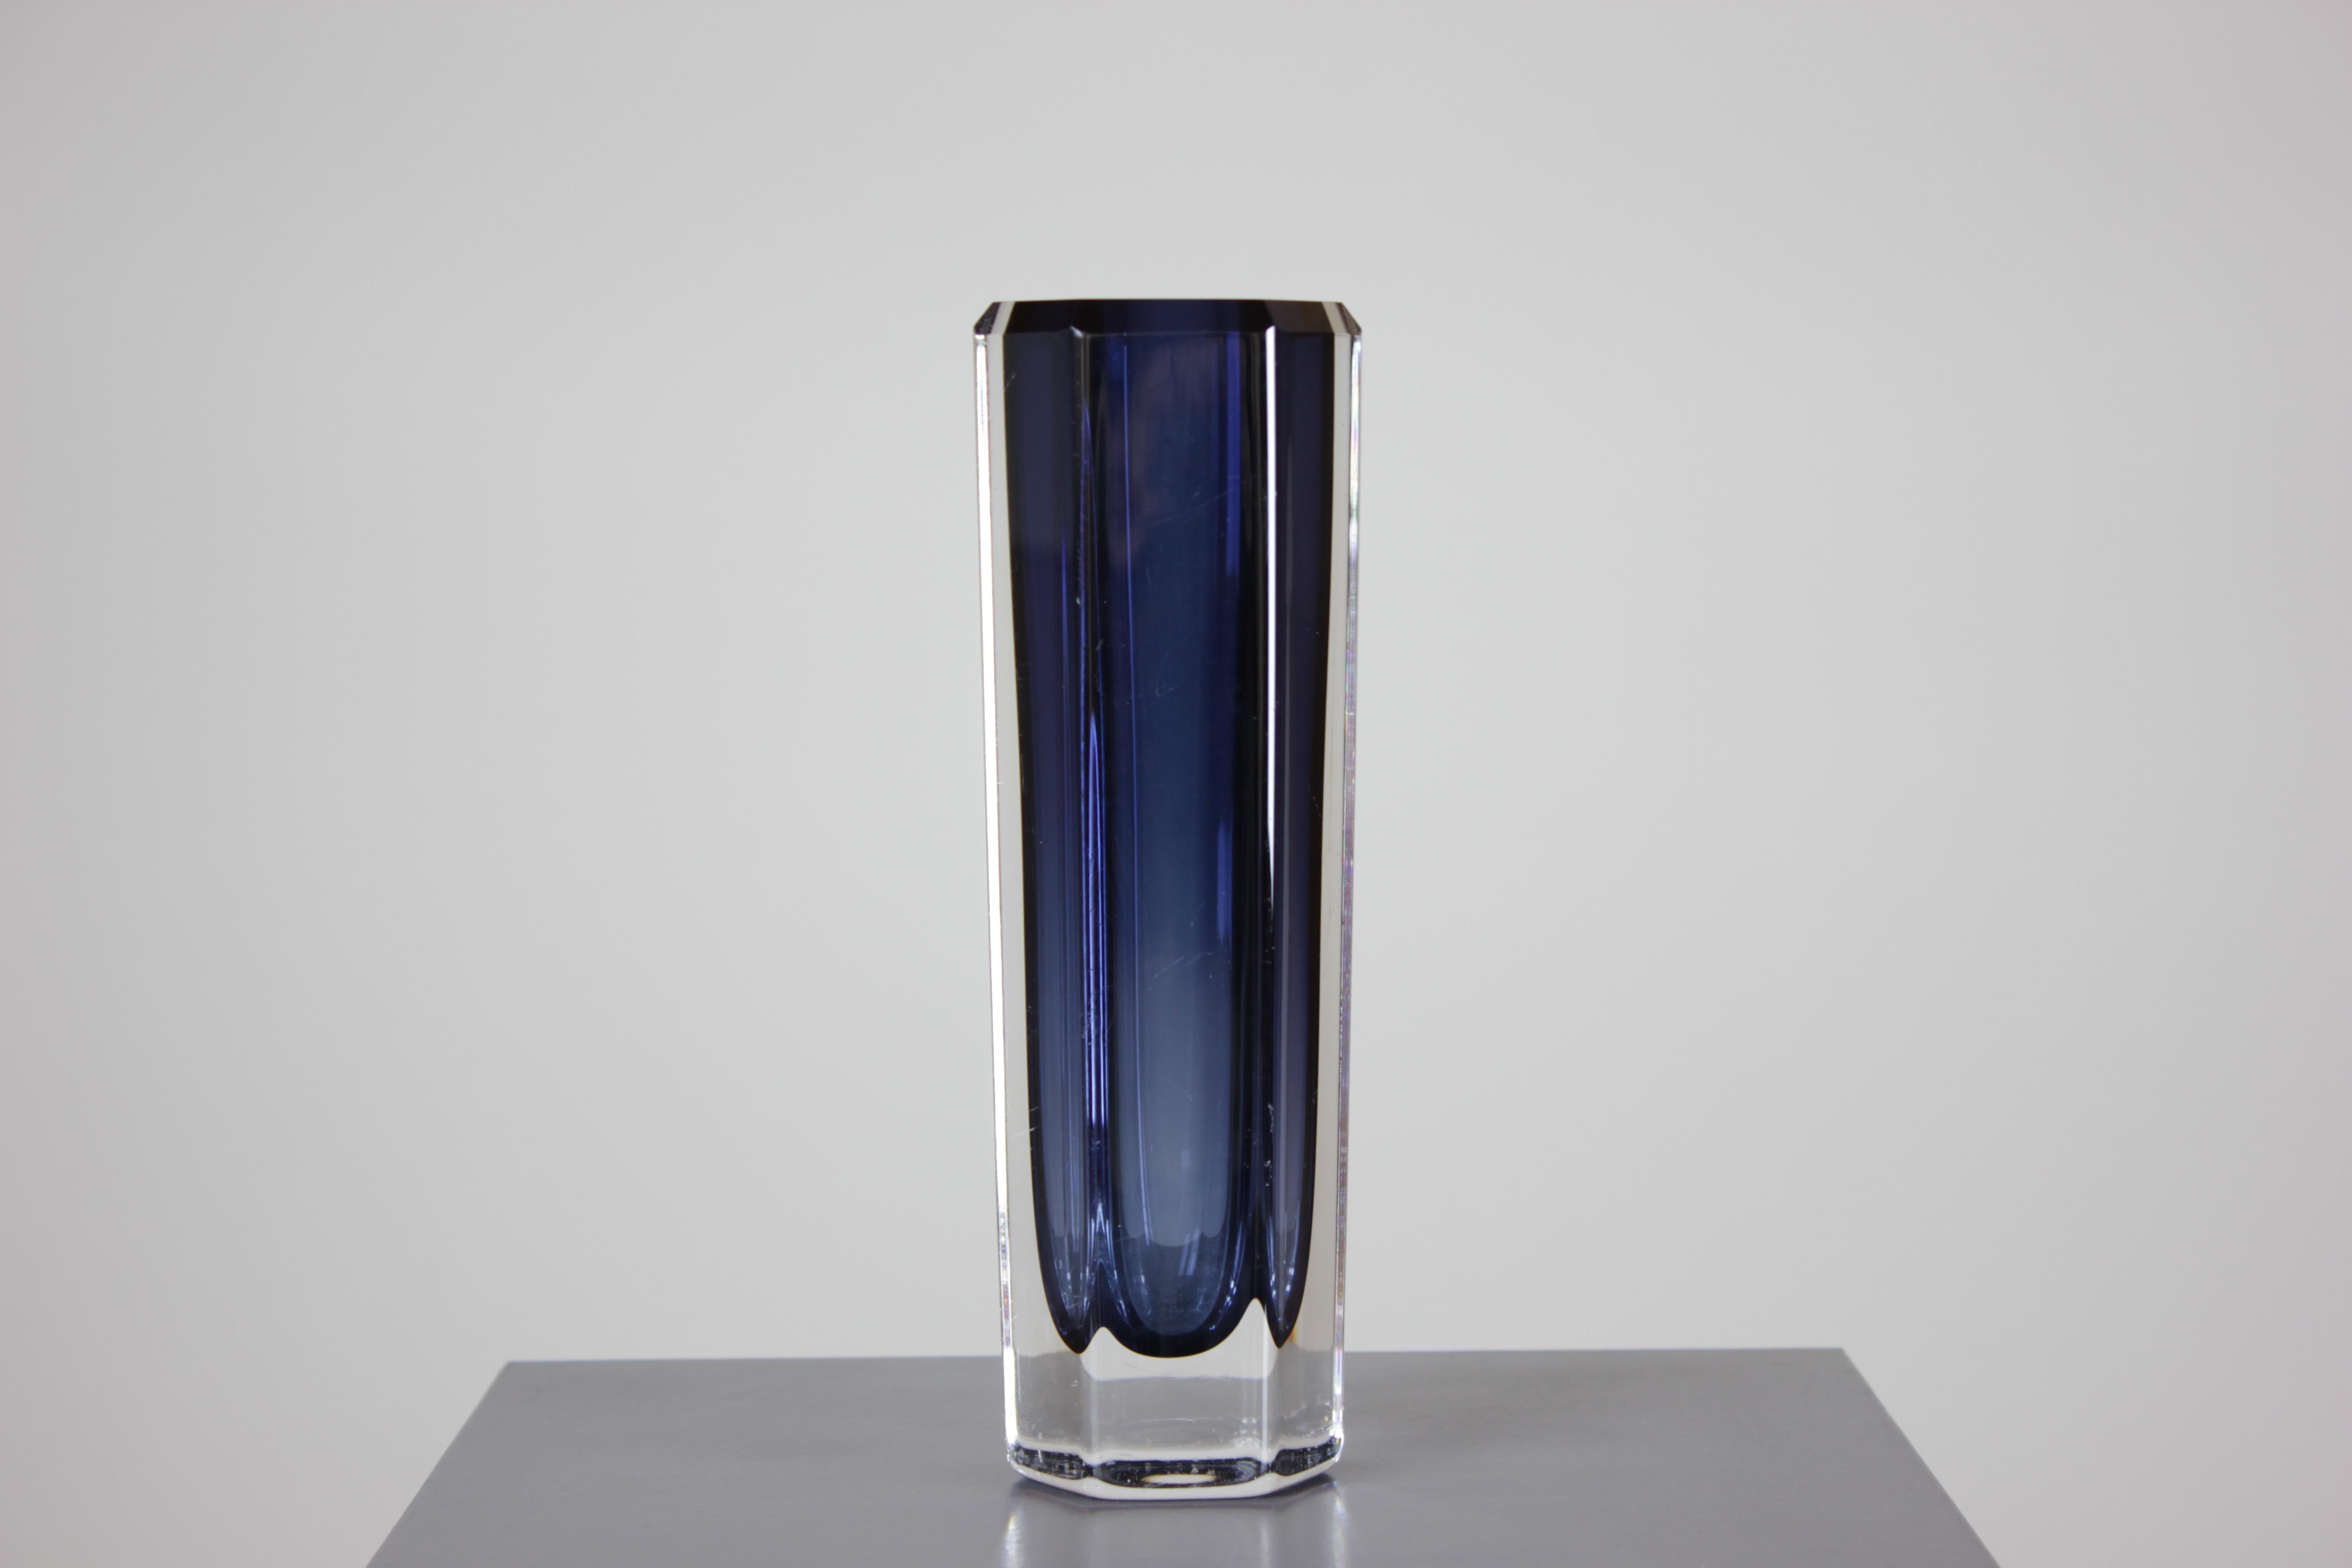 Introduce a touch of artistic elegance to your home decor with this exquisite Mid-Century Glass Art Vase designed by Bengt Edenfalk for Skruf Glasbruk. Crafted with meticulous attention to detail, this authentic glass art vase exudes timeless beauty